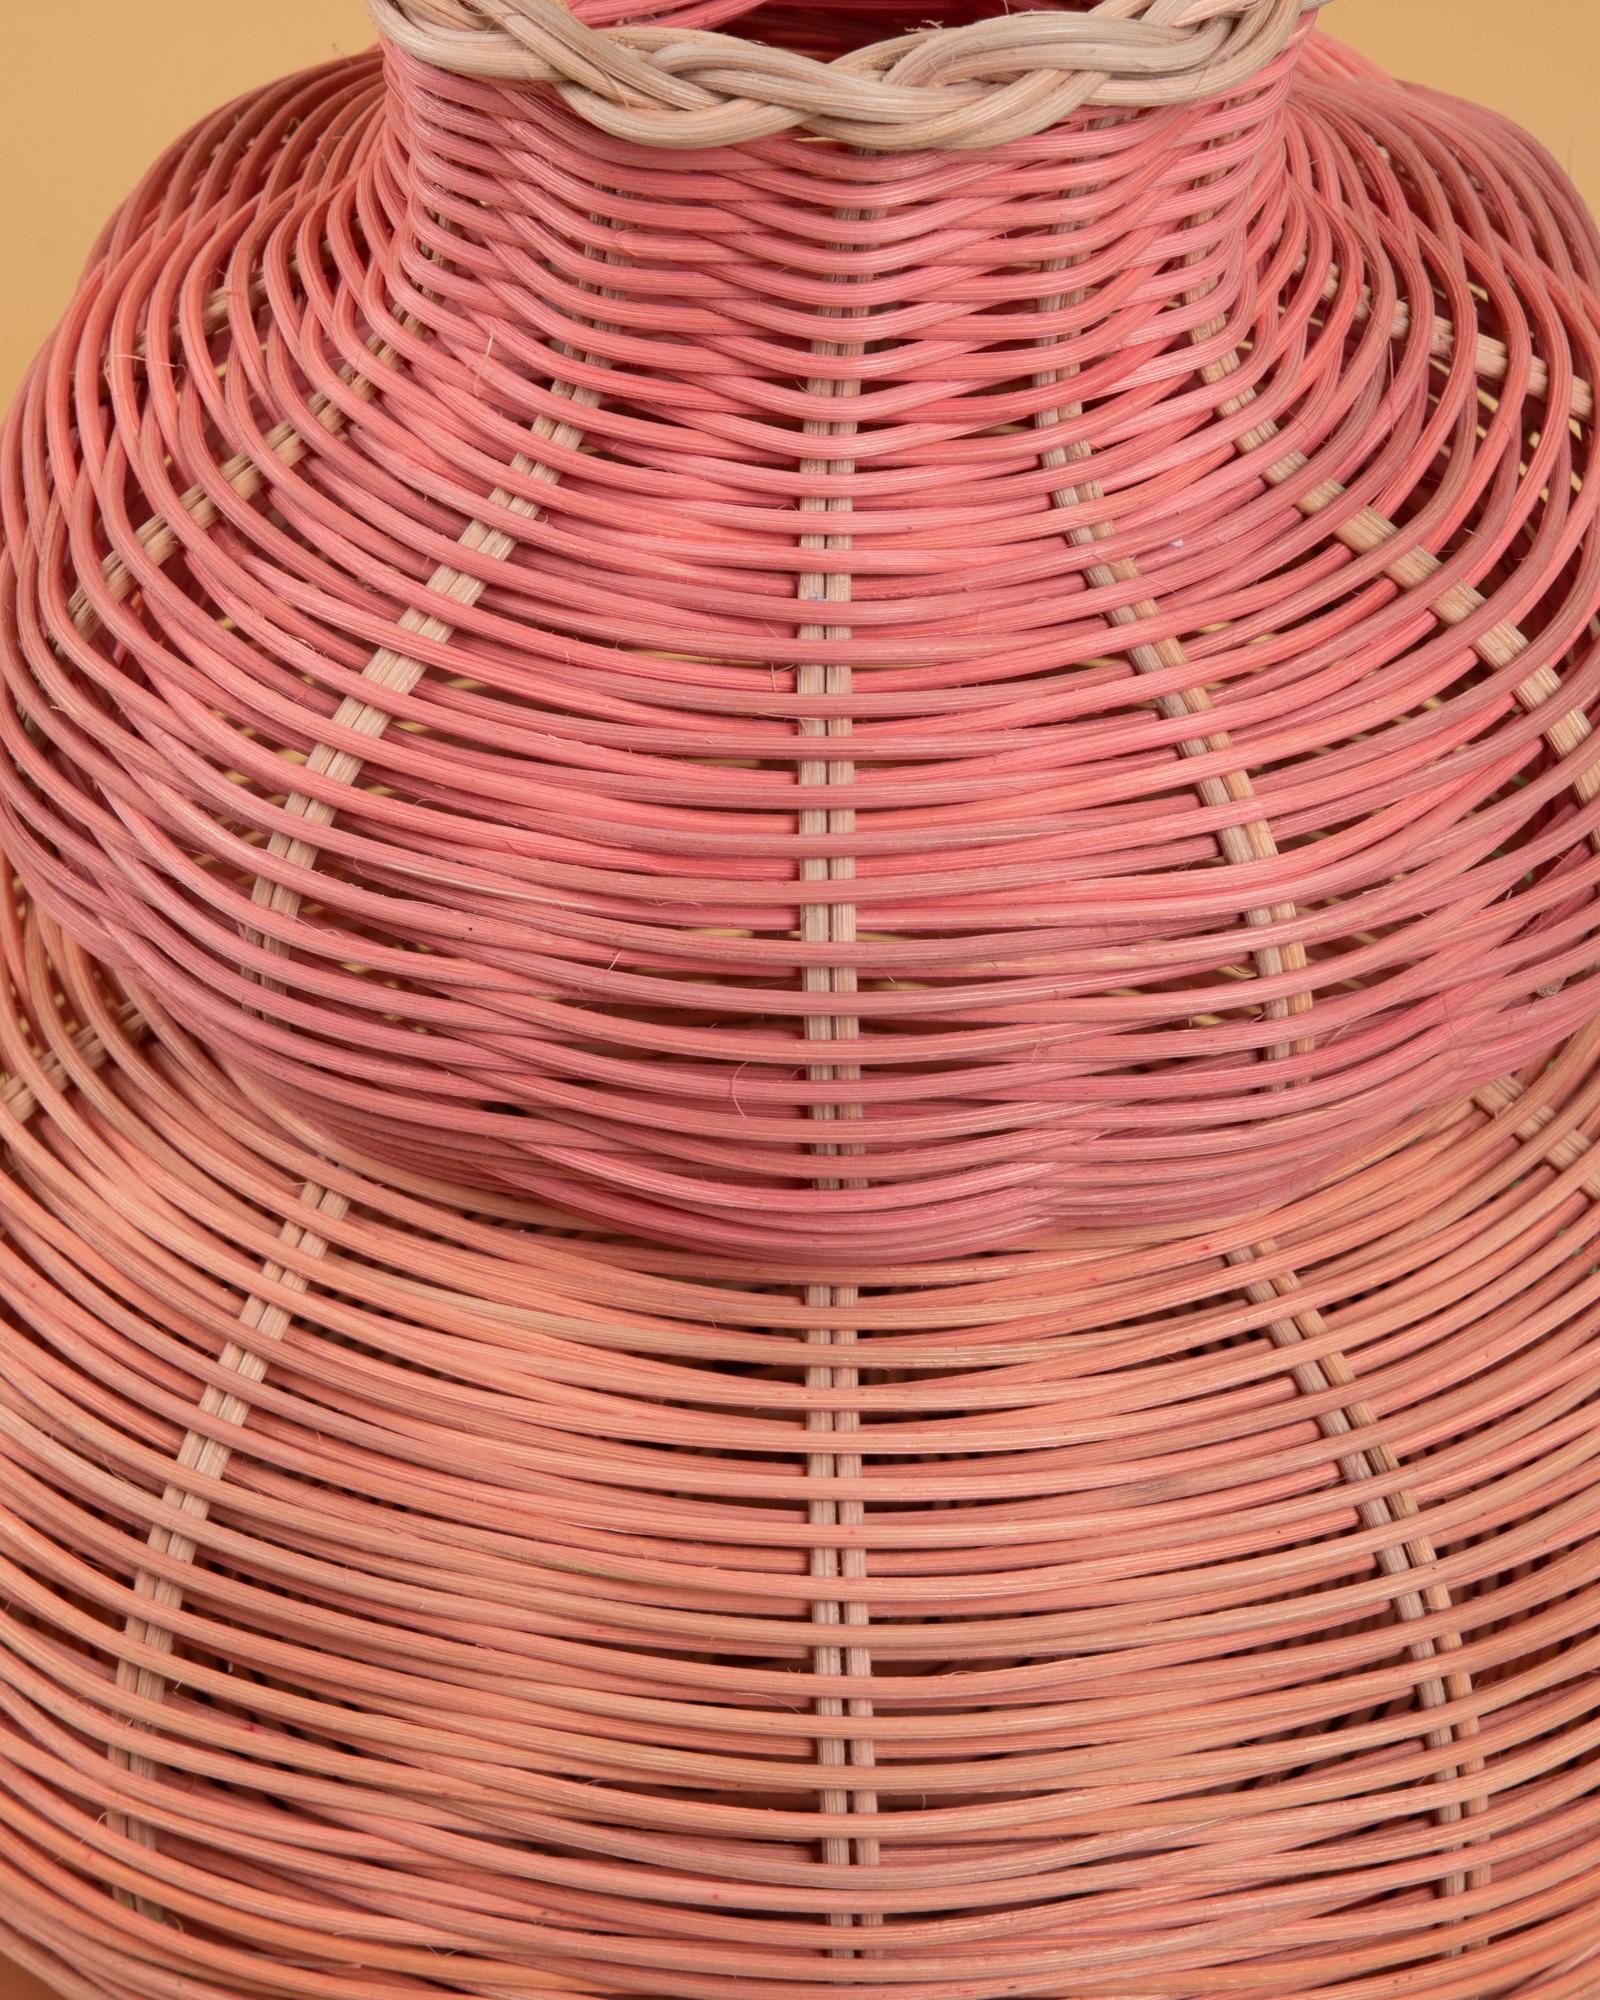 Modern Hillary Woven Vase in Peach and Pink by Studio Herron